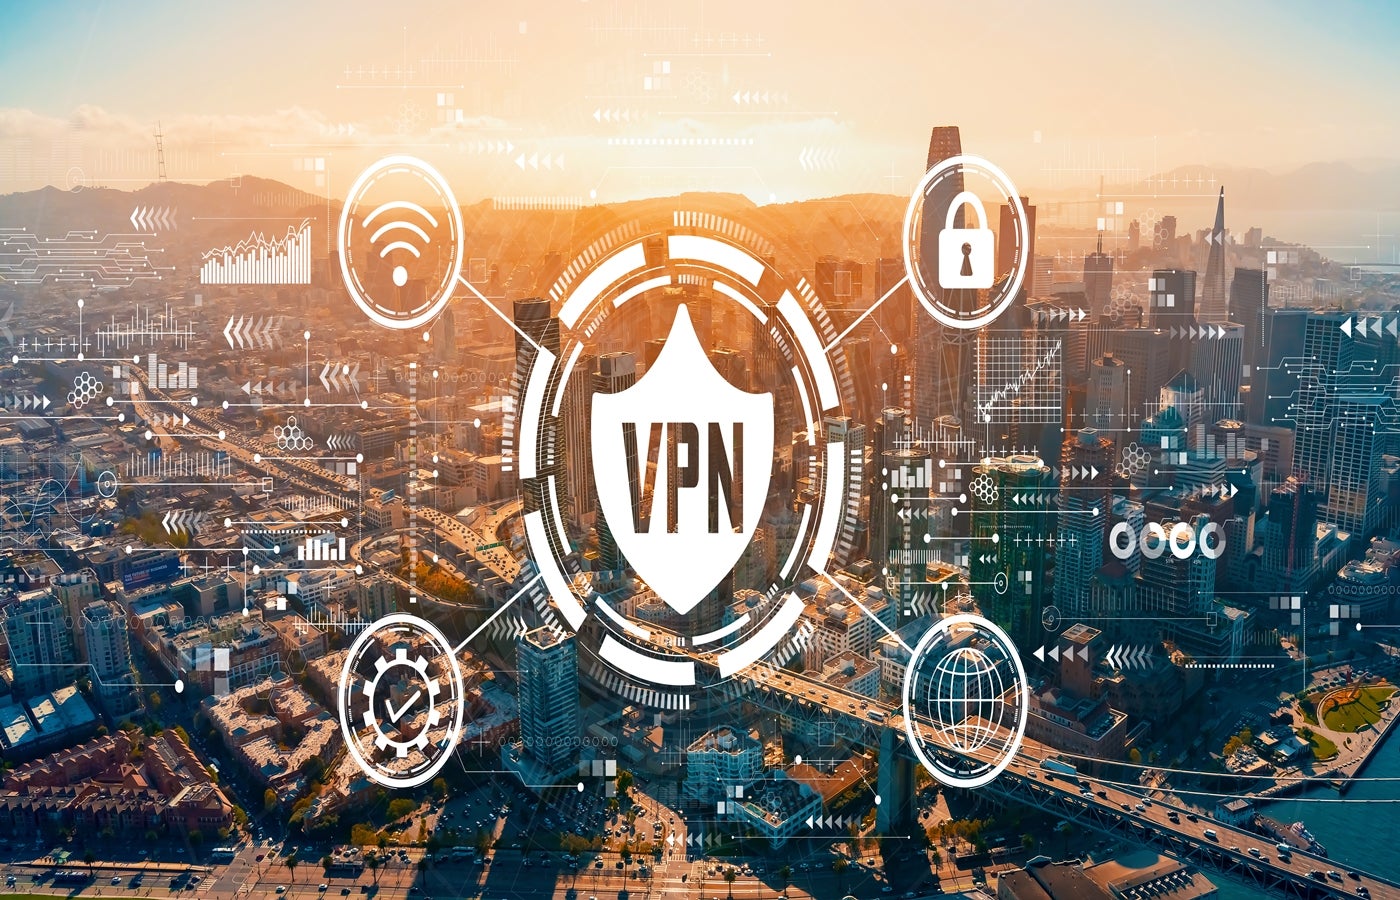 Can a VPN Be Hacked?